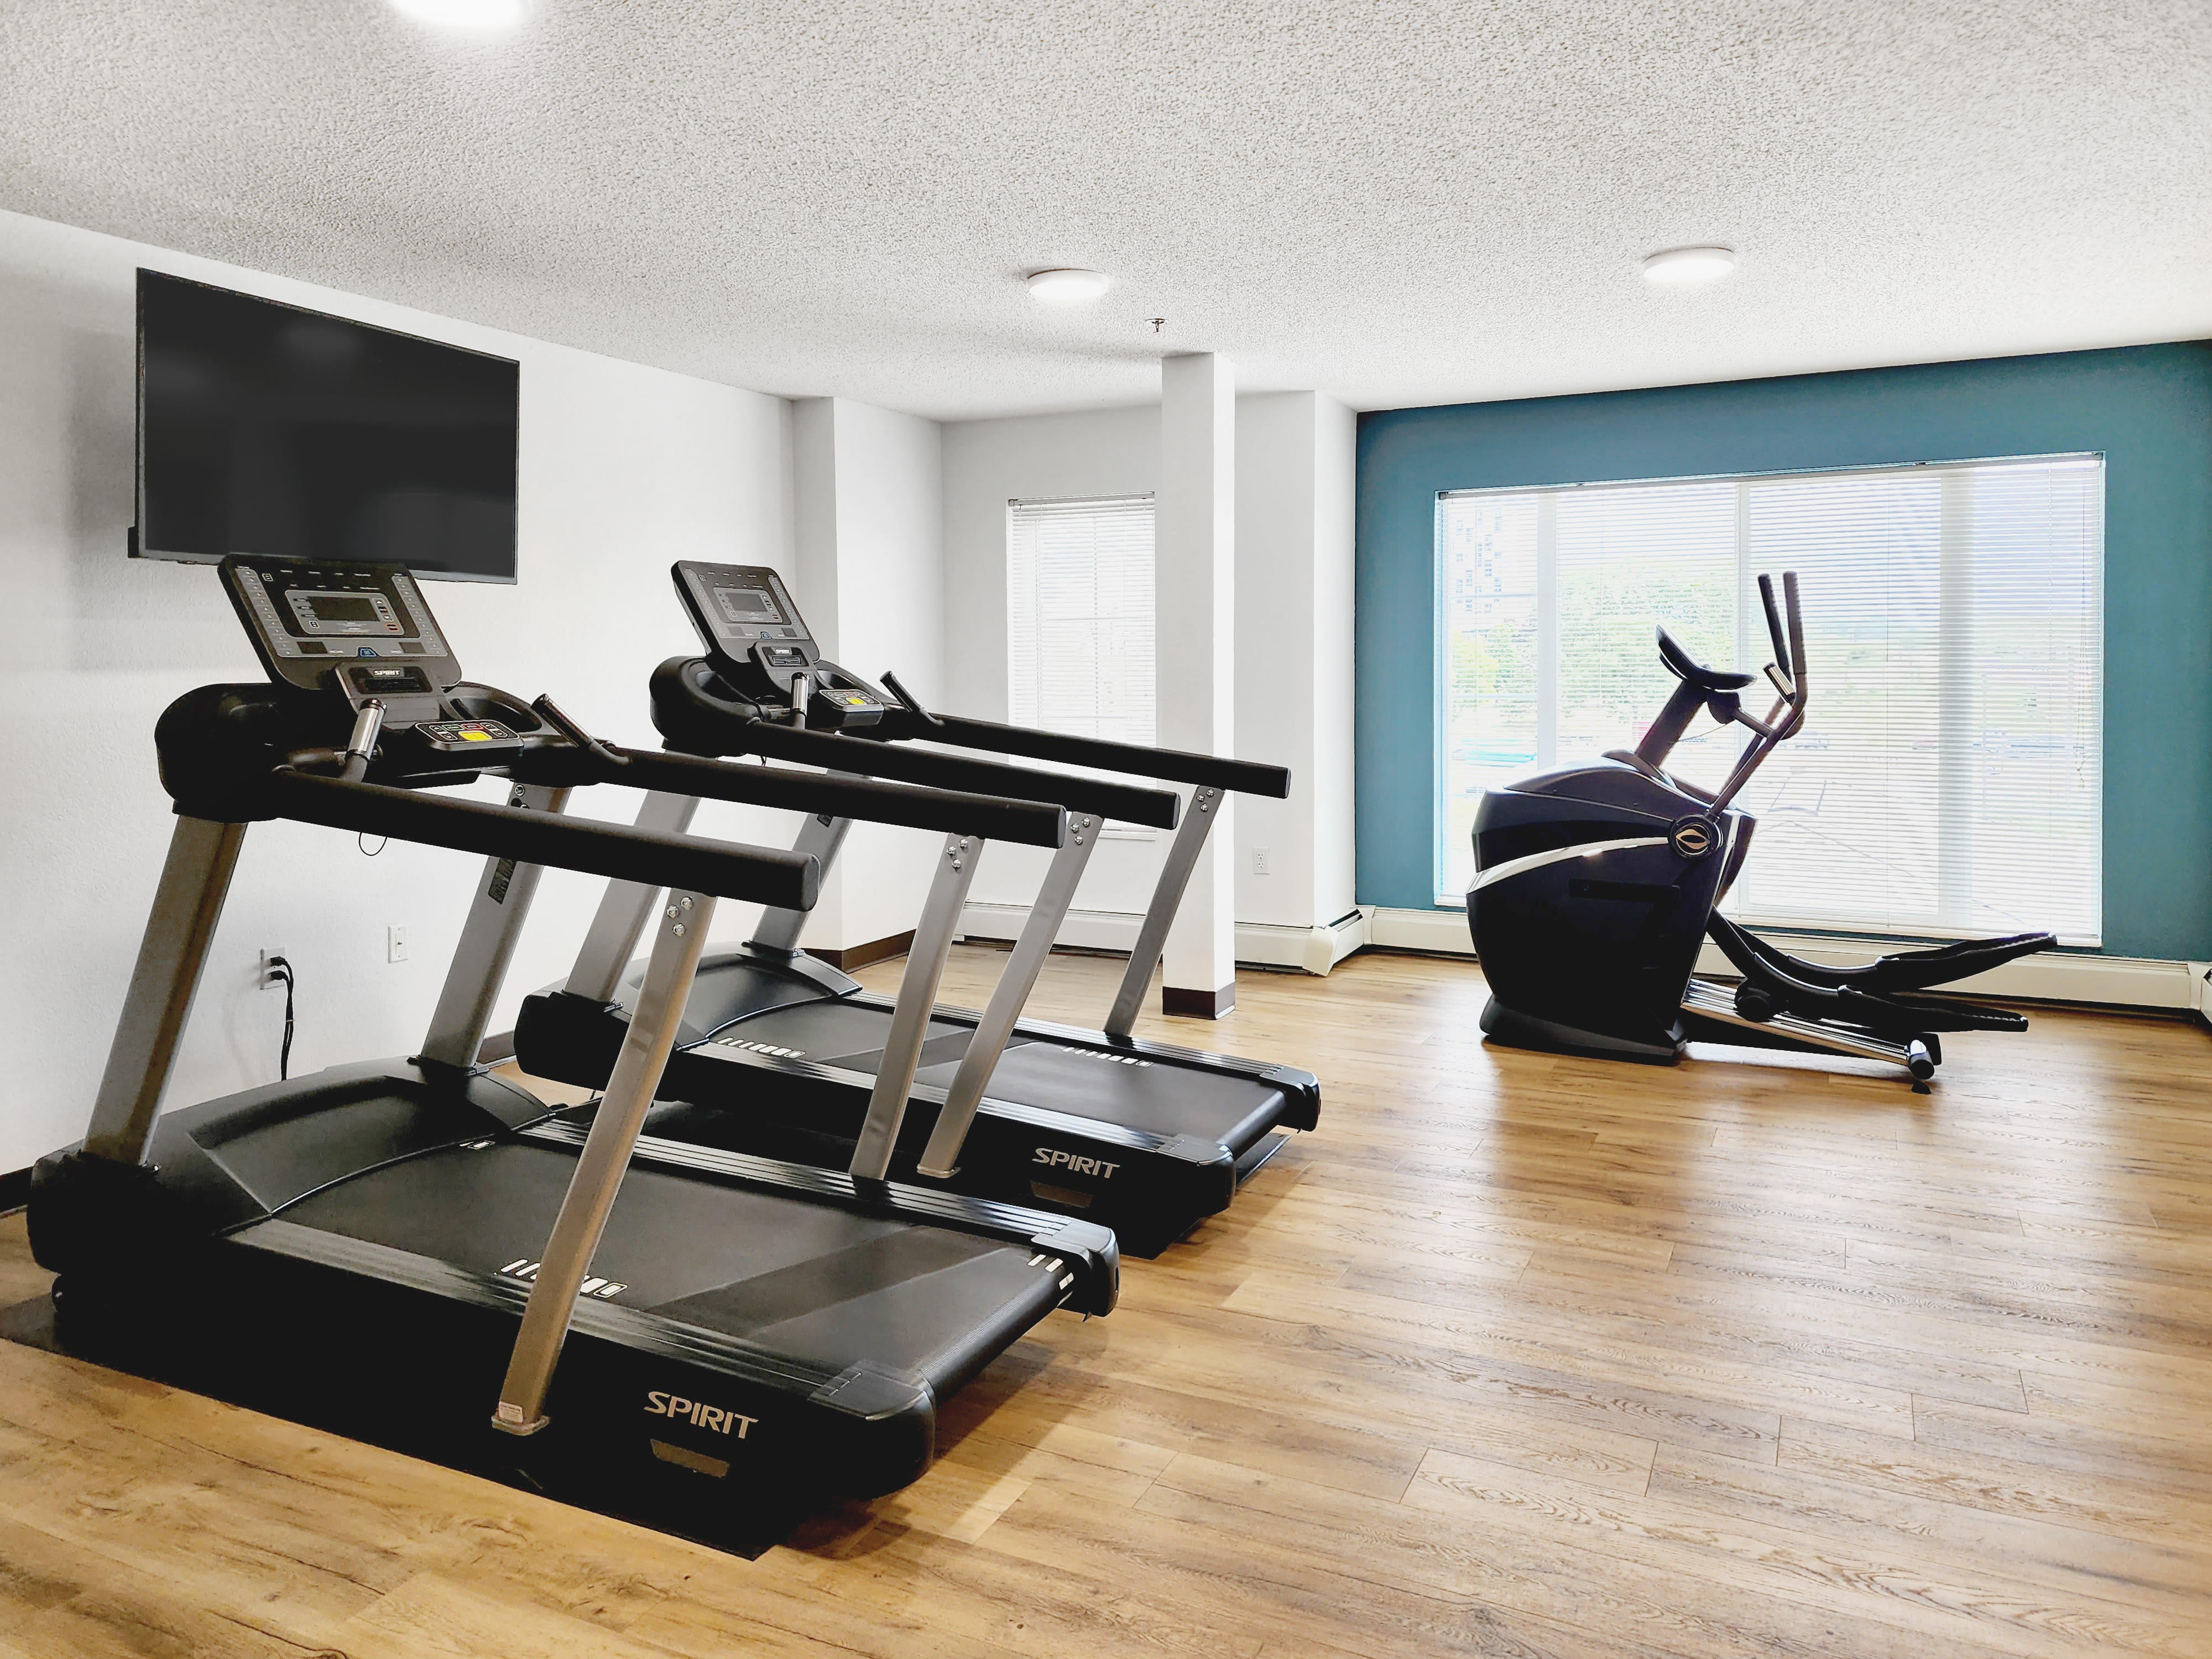 A fitness center with a large window at Parkway Gardens Senior Apartment Community in Saint Paul, Minnesota